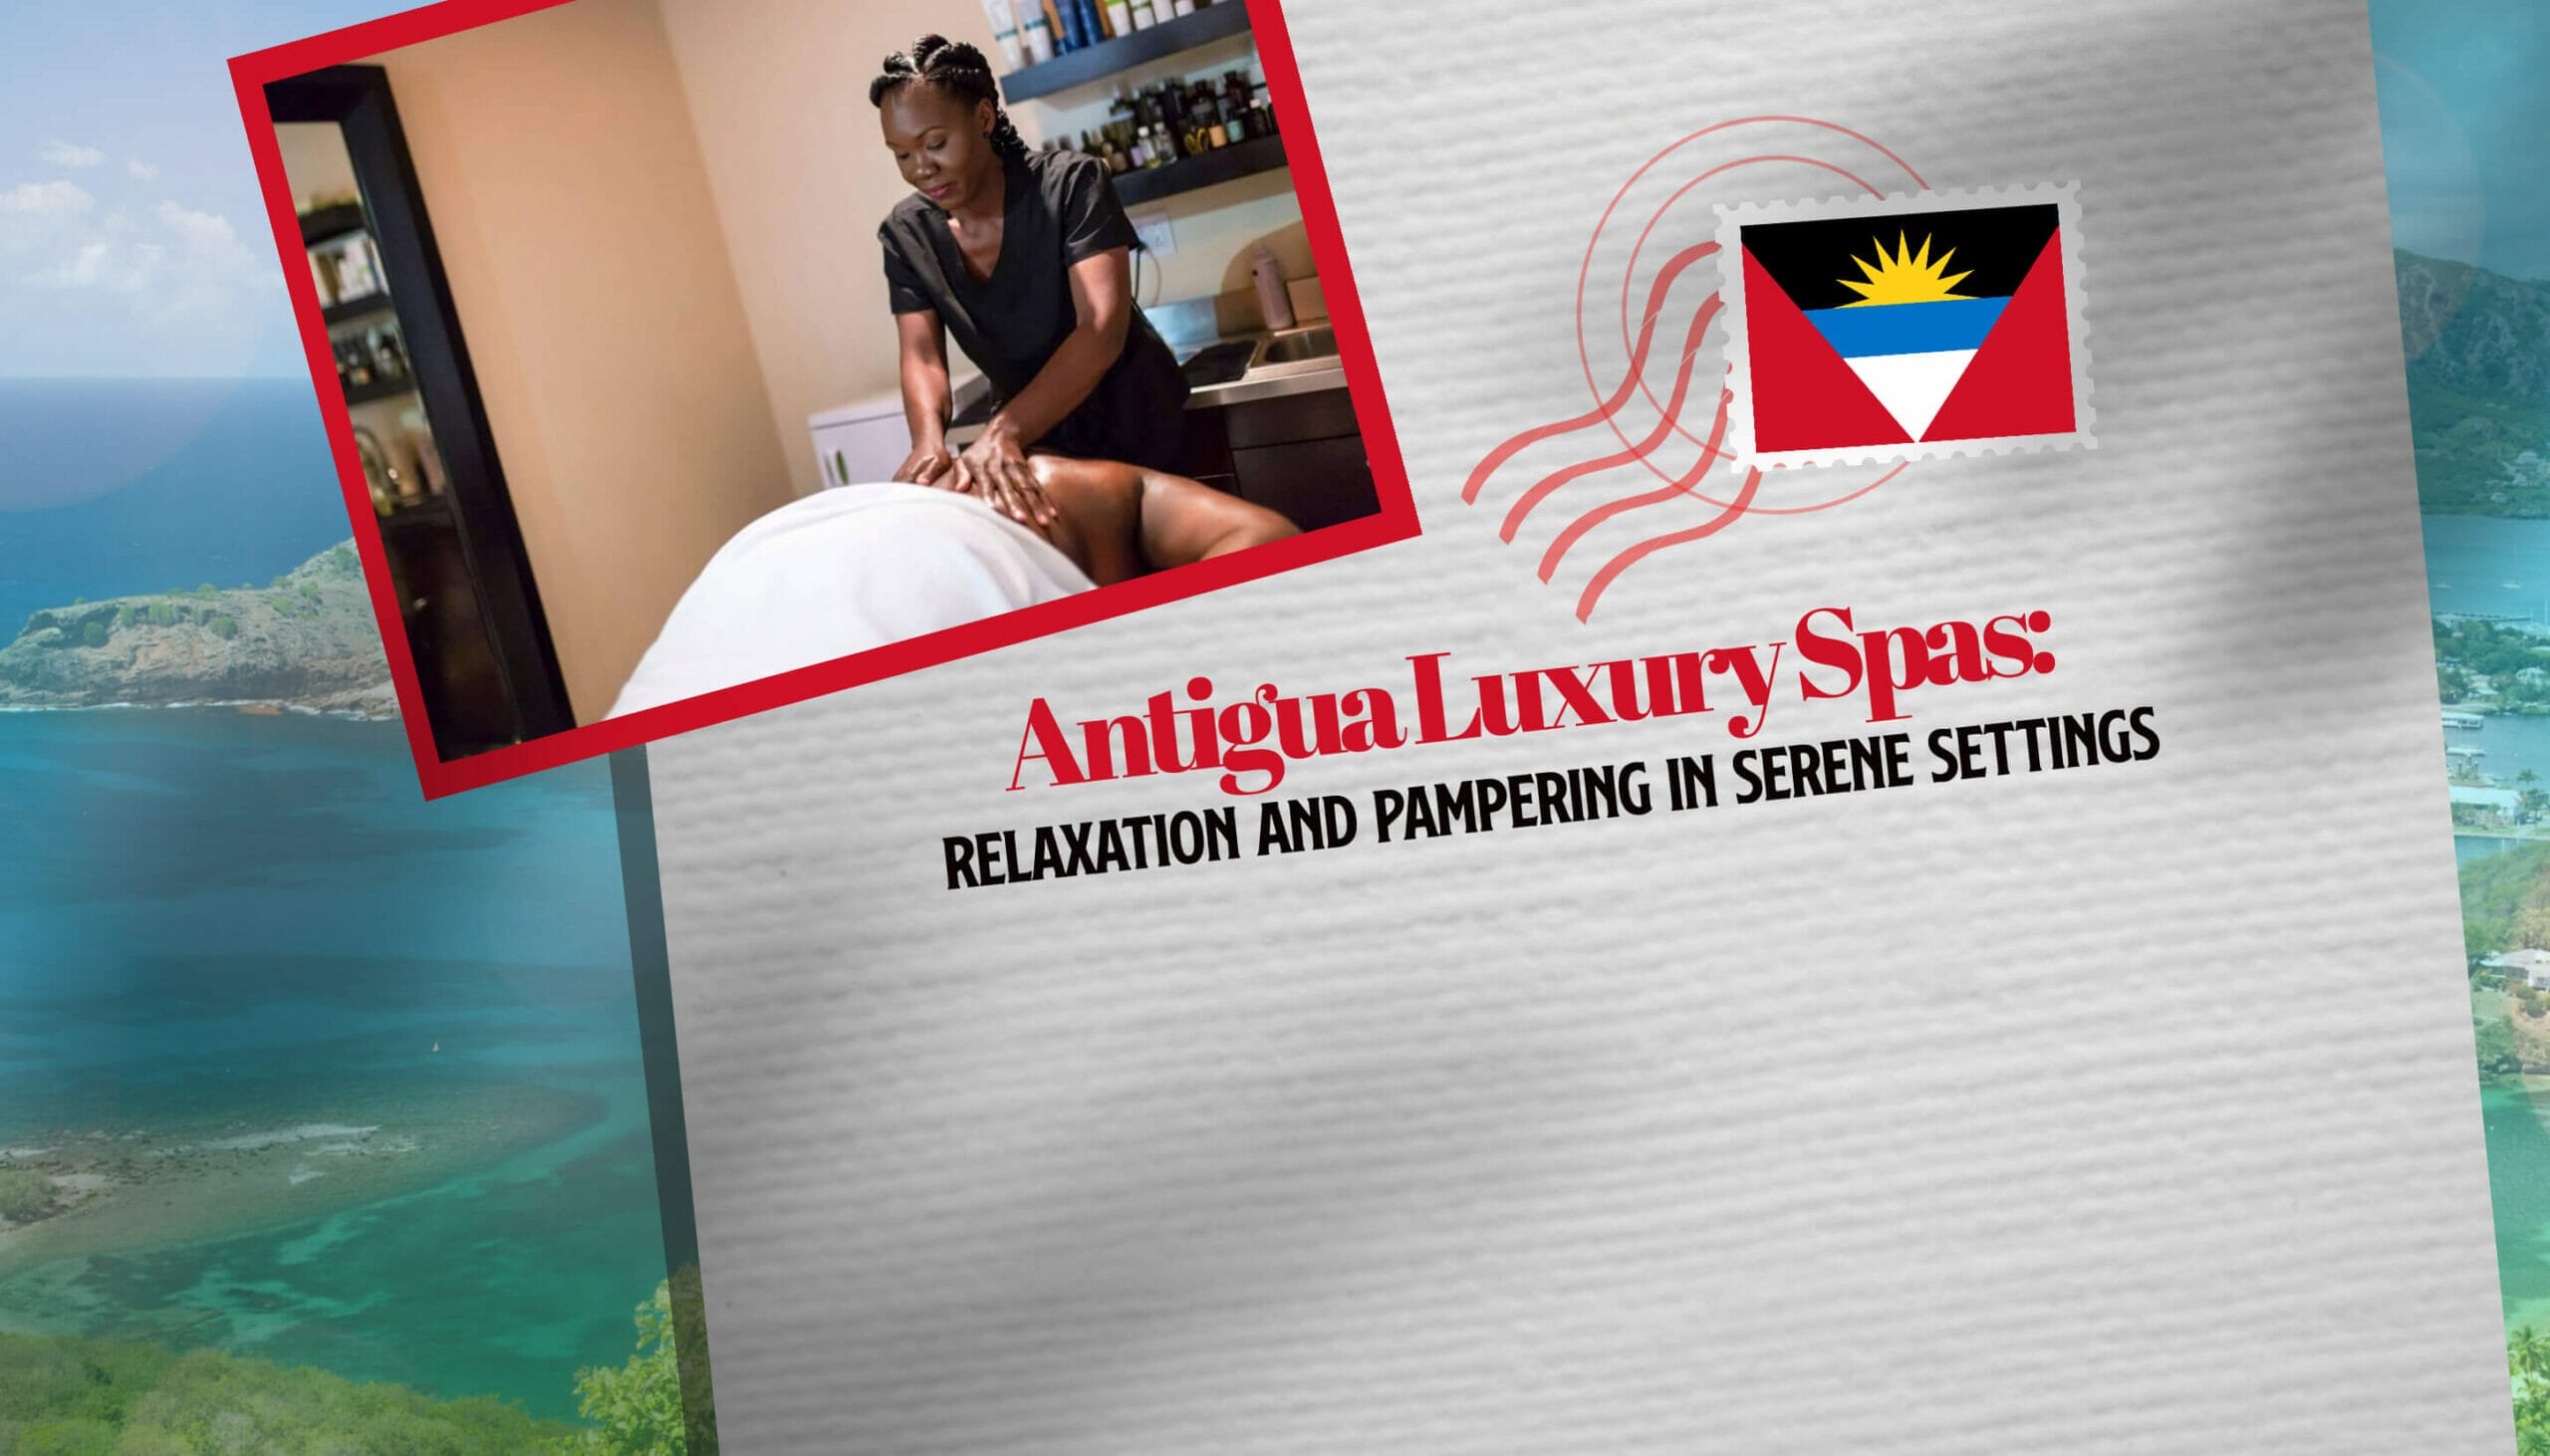 Antigua Luxury Spas Relaxation and Pampering in Serene Settings